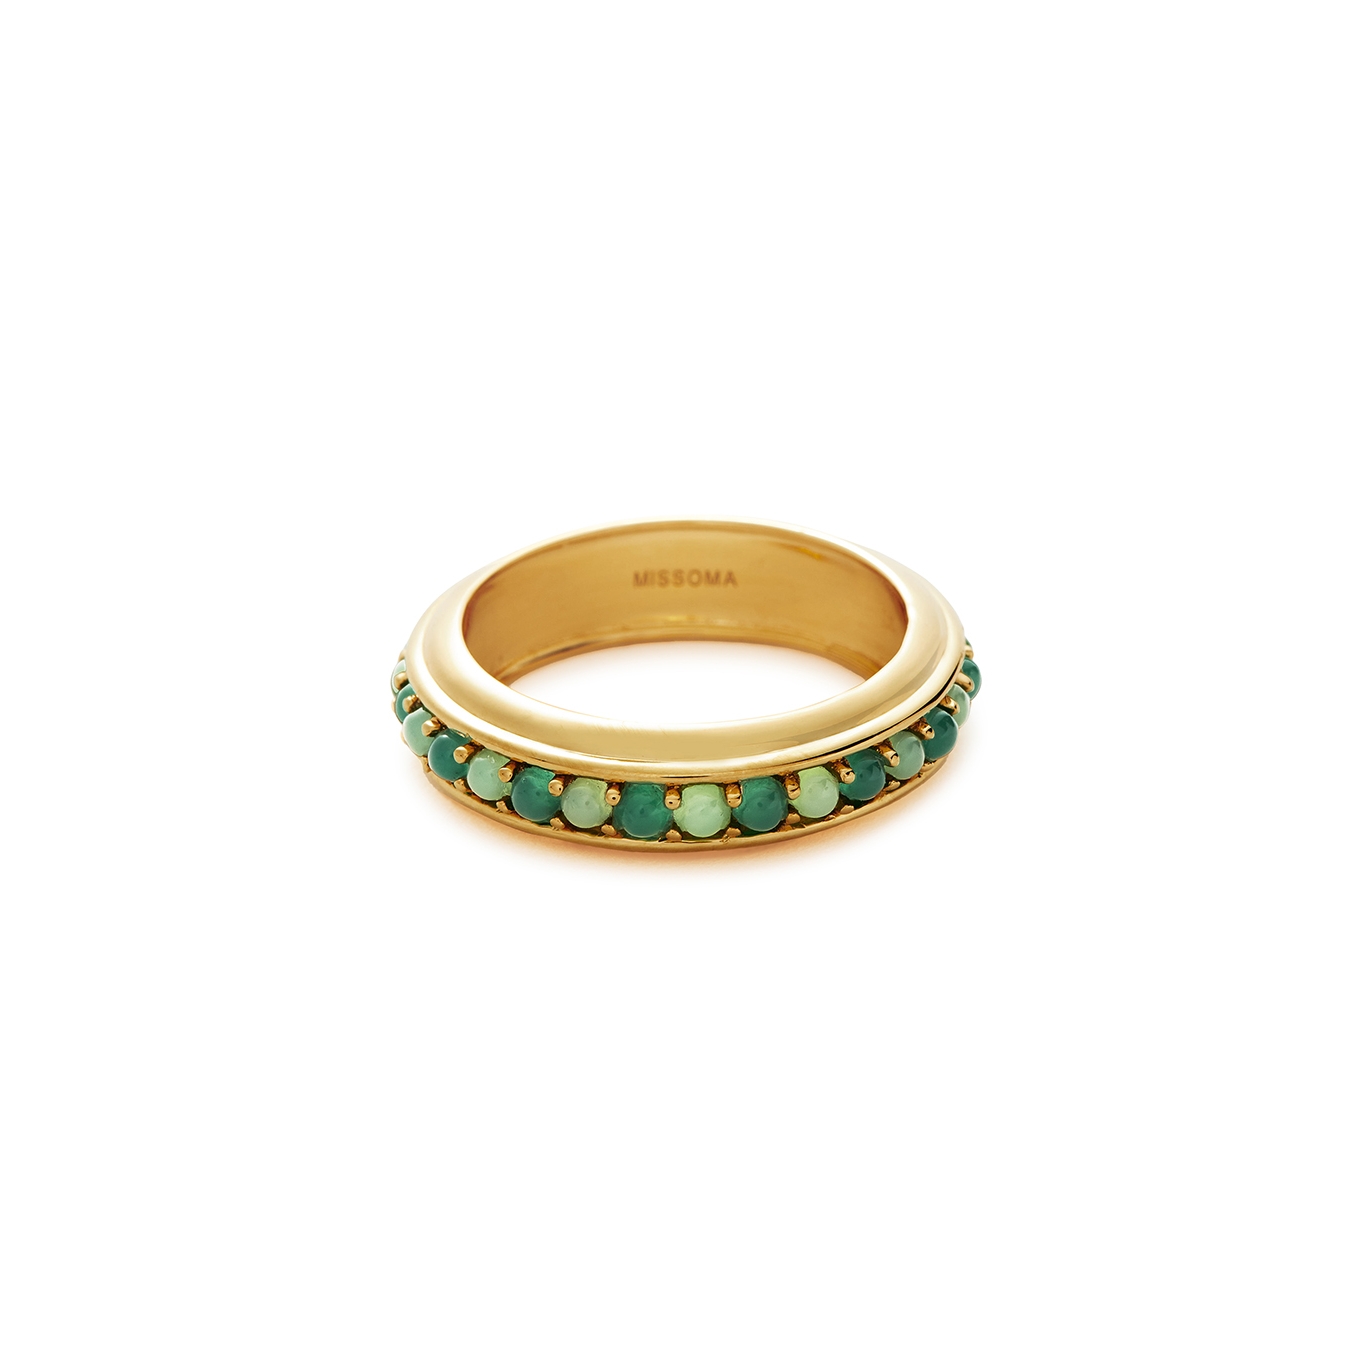 Missoma Hot Rox 18kt Gold-plated Vermeil Ring - Petite